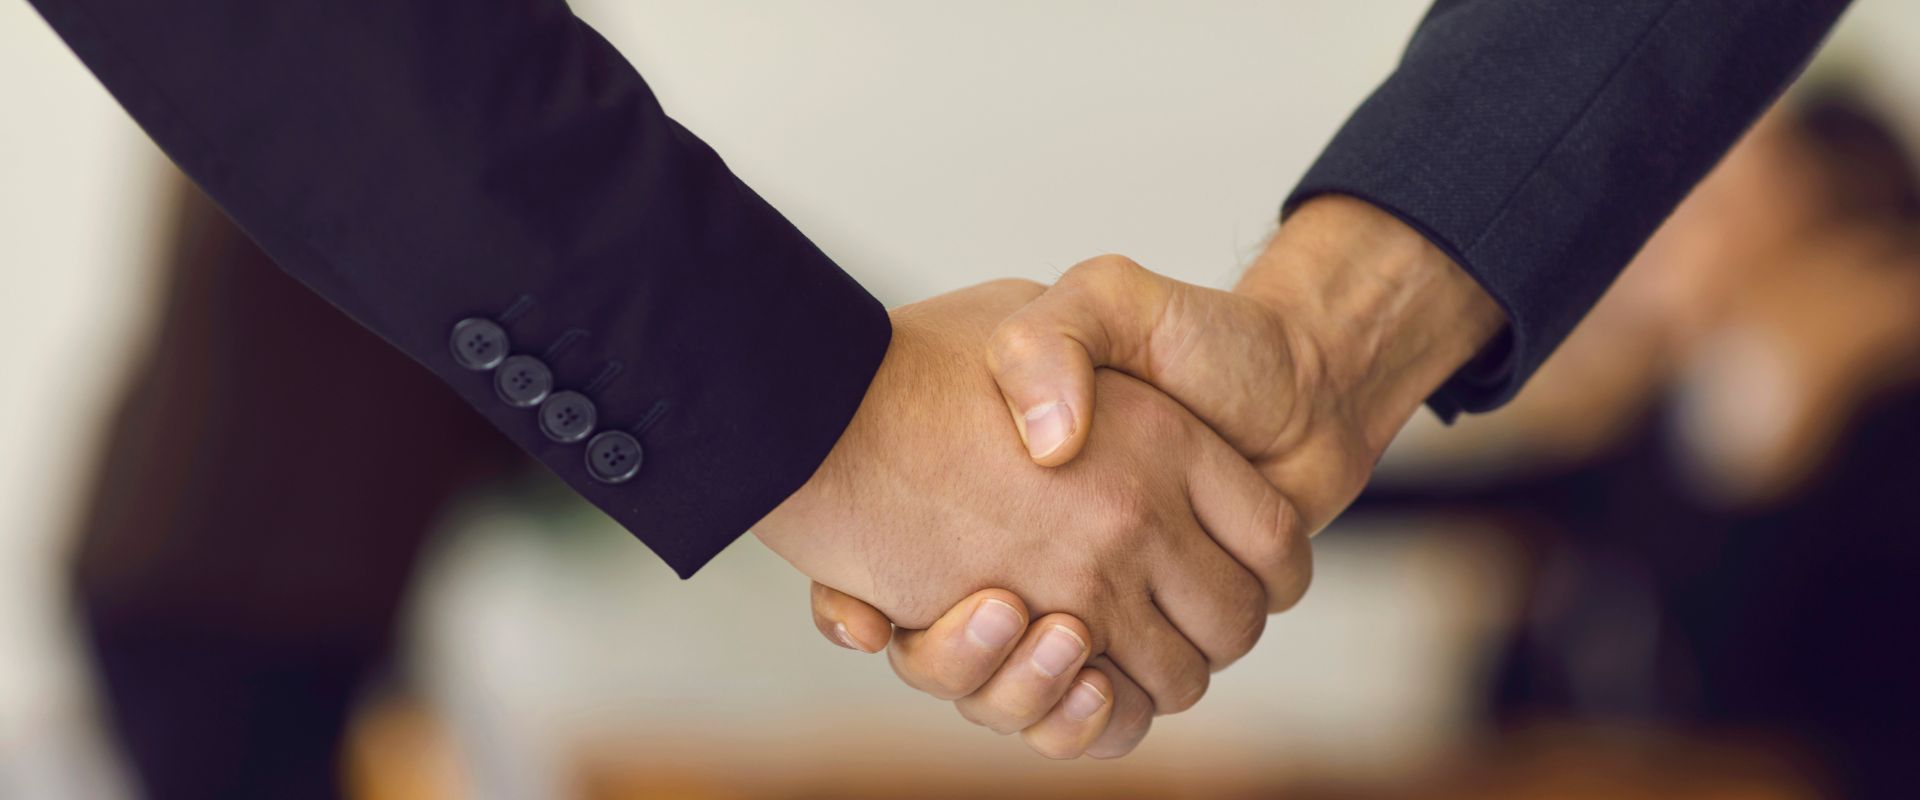 business partners shaking hands after making deal